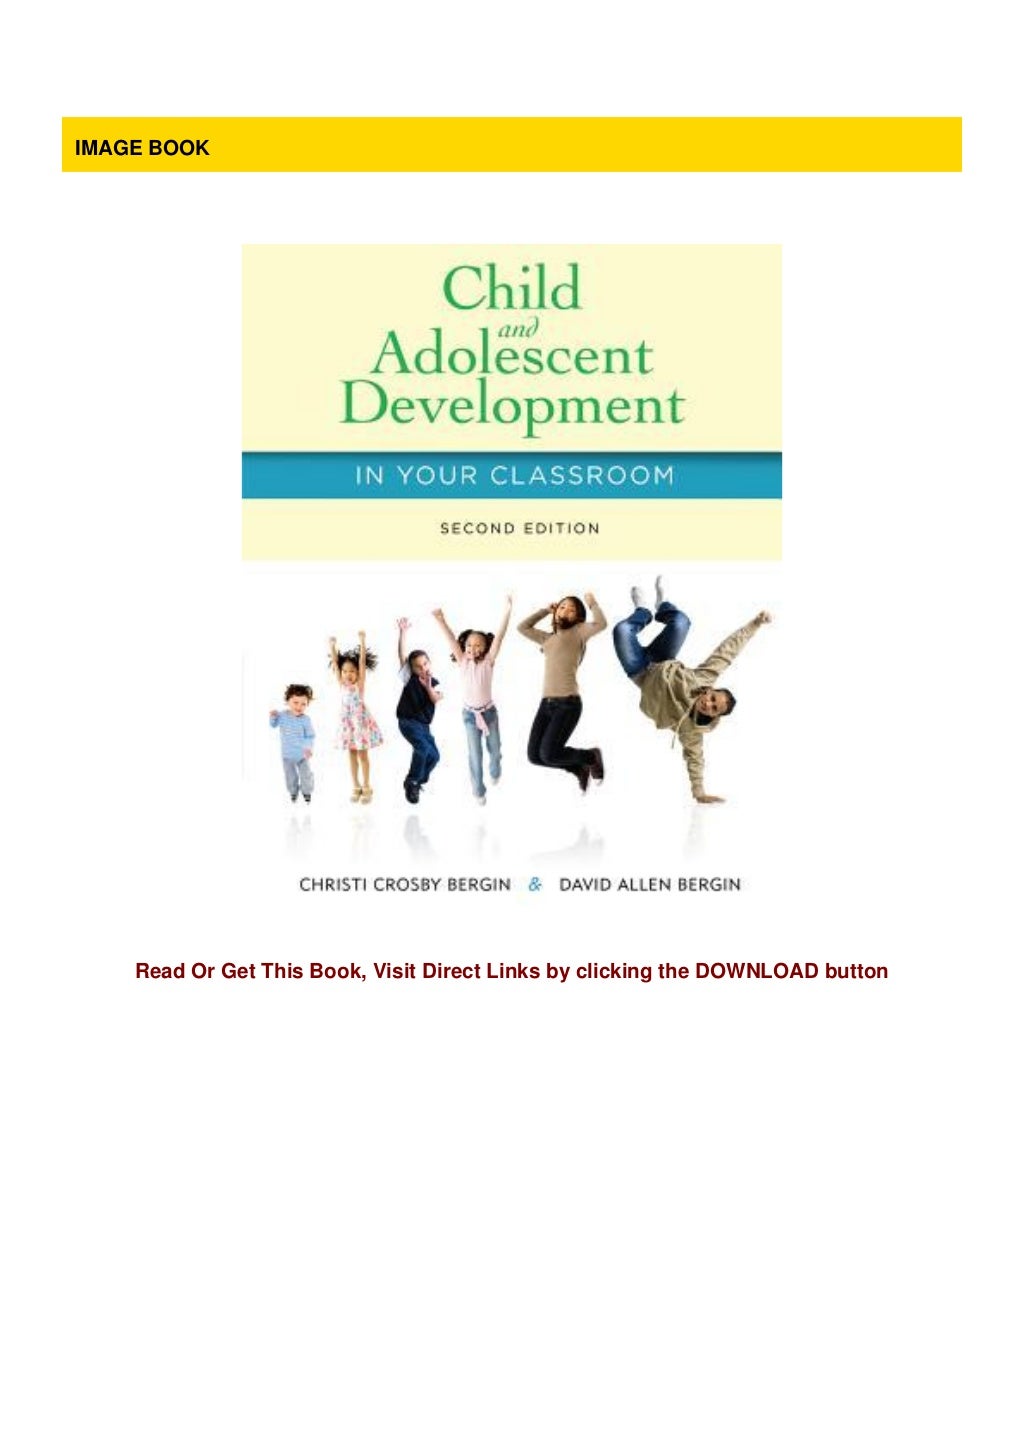 research abstract about child and adolescent development pdf free download